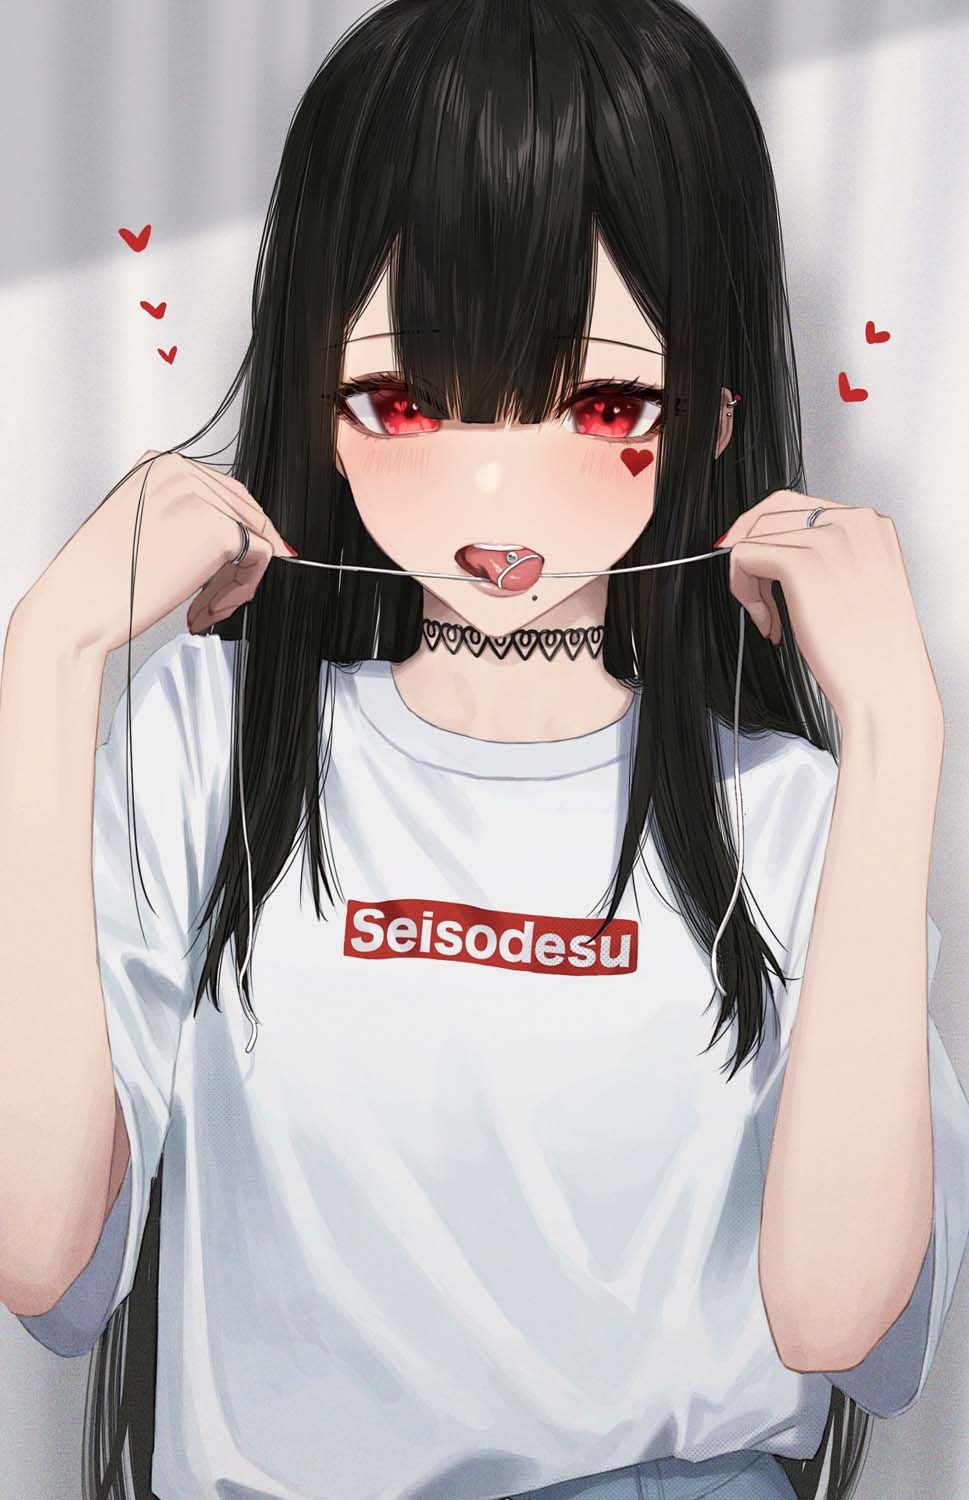 Anime girl with red eyes and black hair holding a needle with red hearts - Anime girl